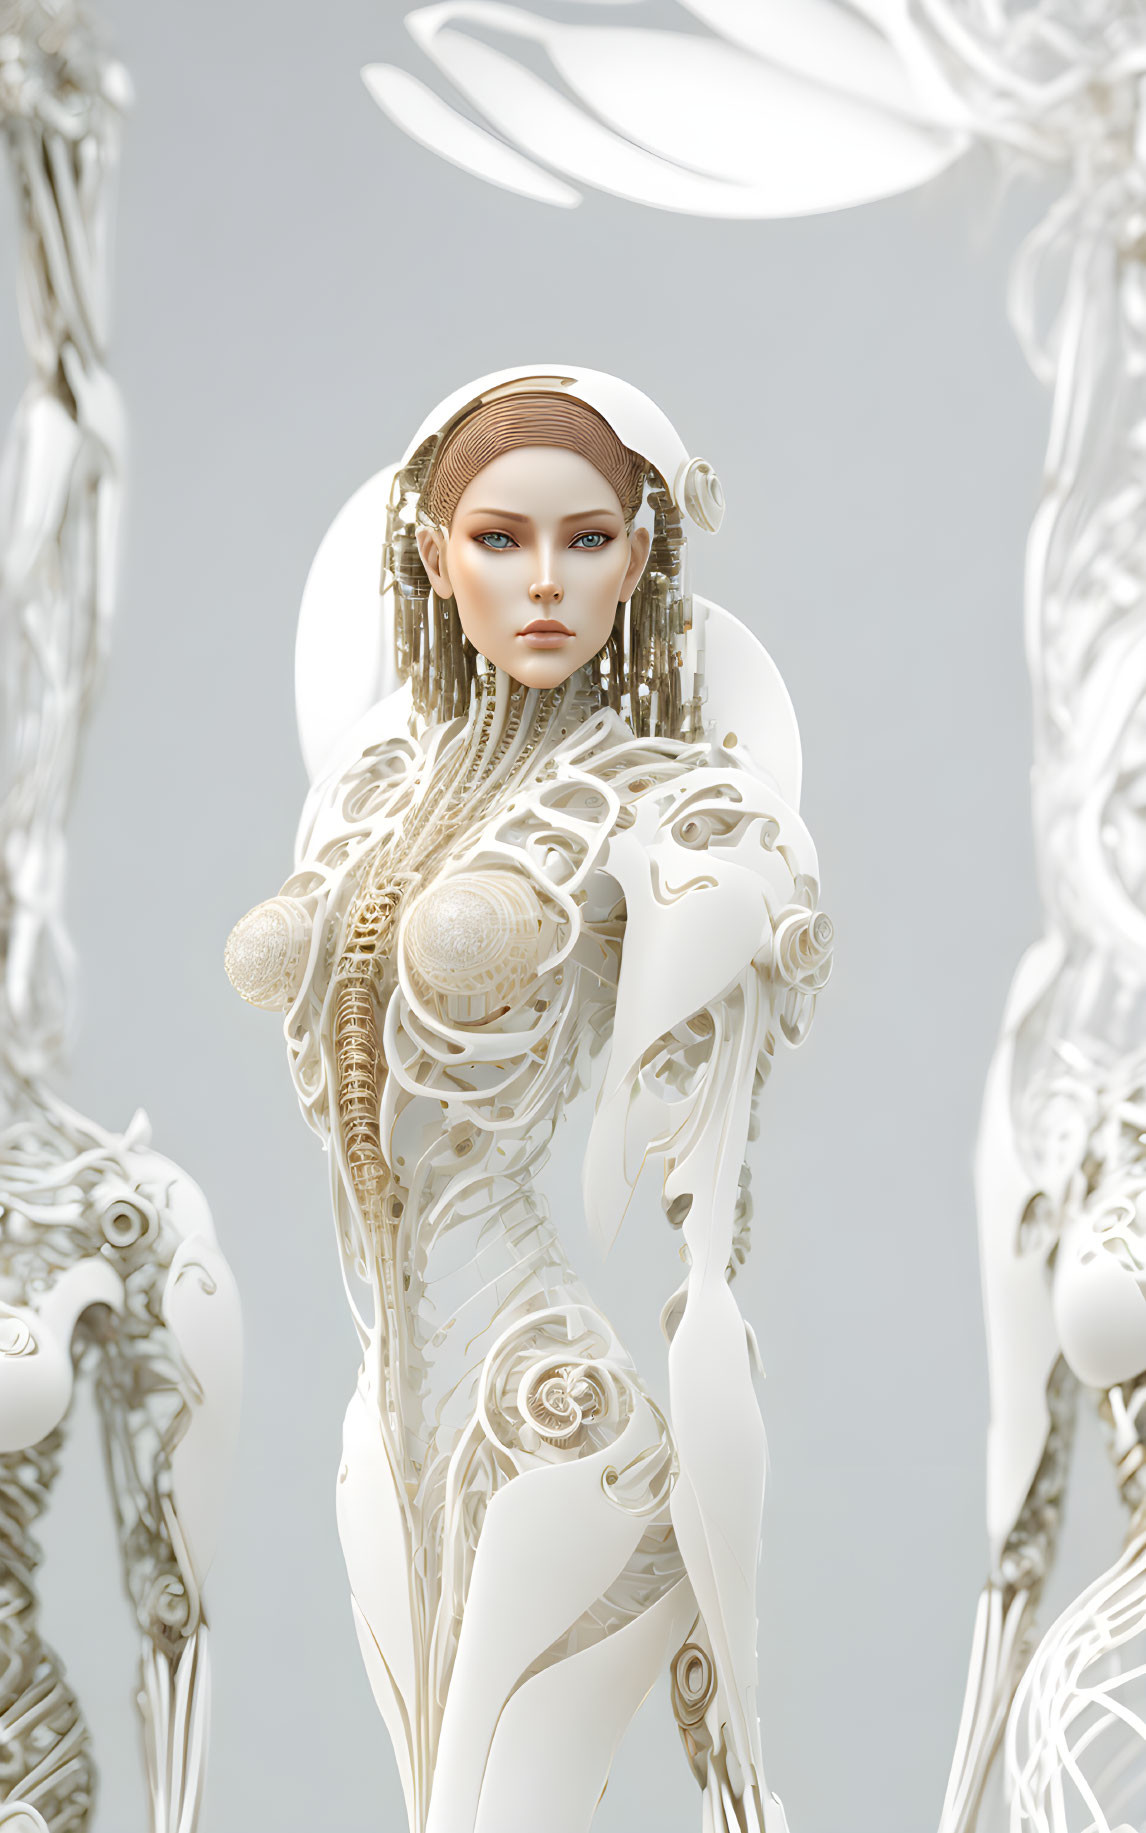 Futuristic female humanoid robot with intricate white and gold designs